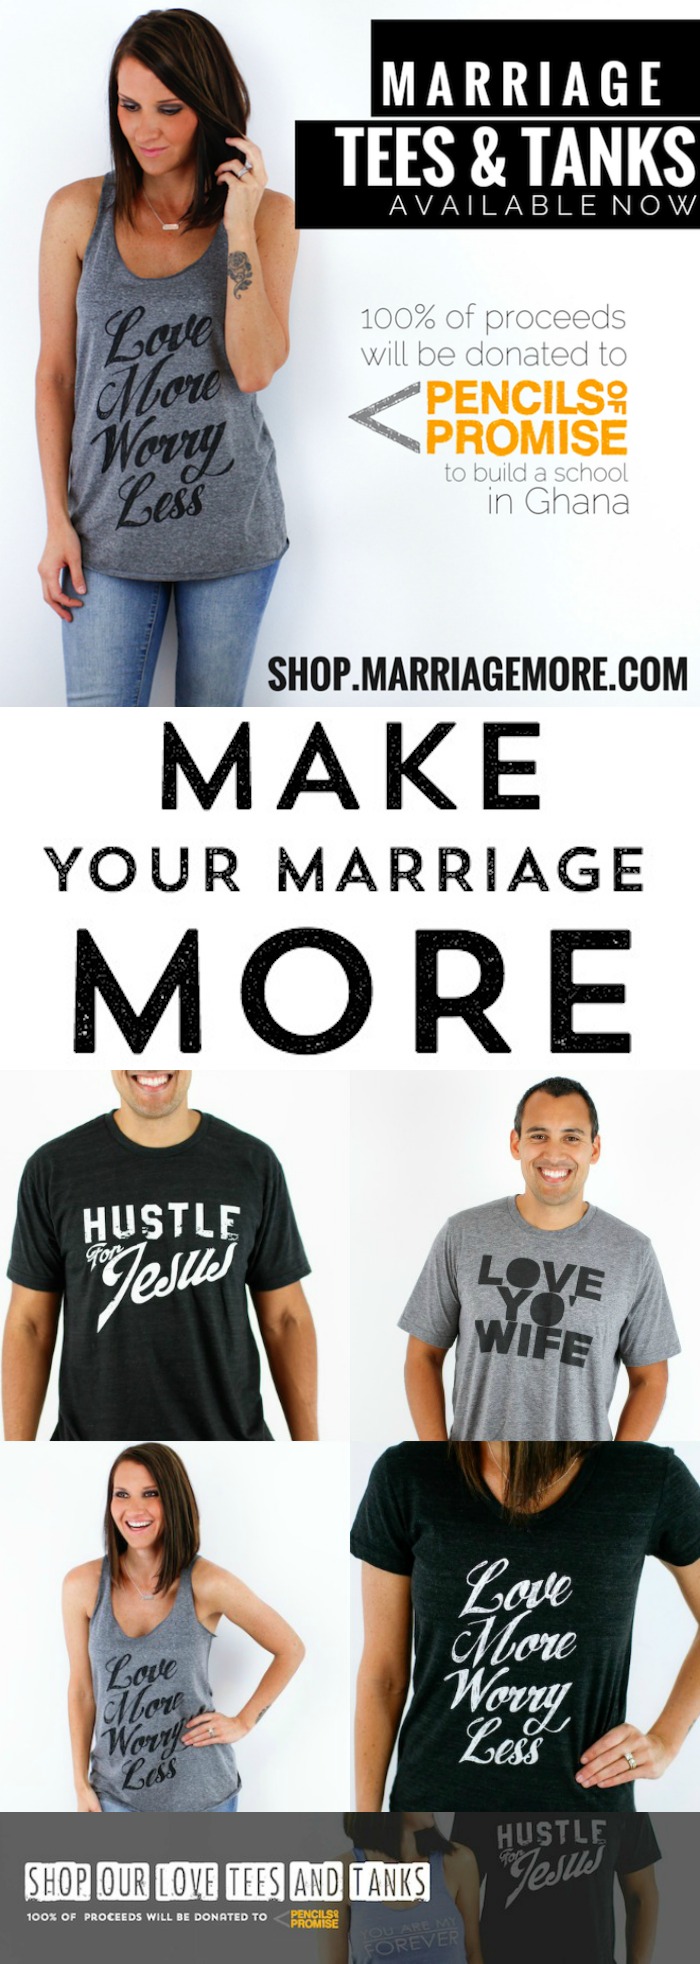 Wear Your Love - Marriage Tees and Tanks from Shop.houseofroseblog.com